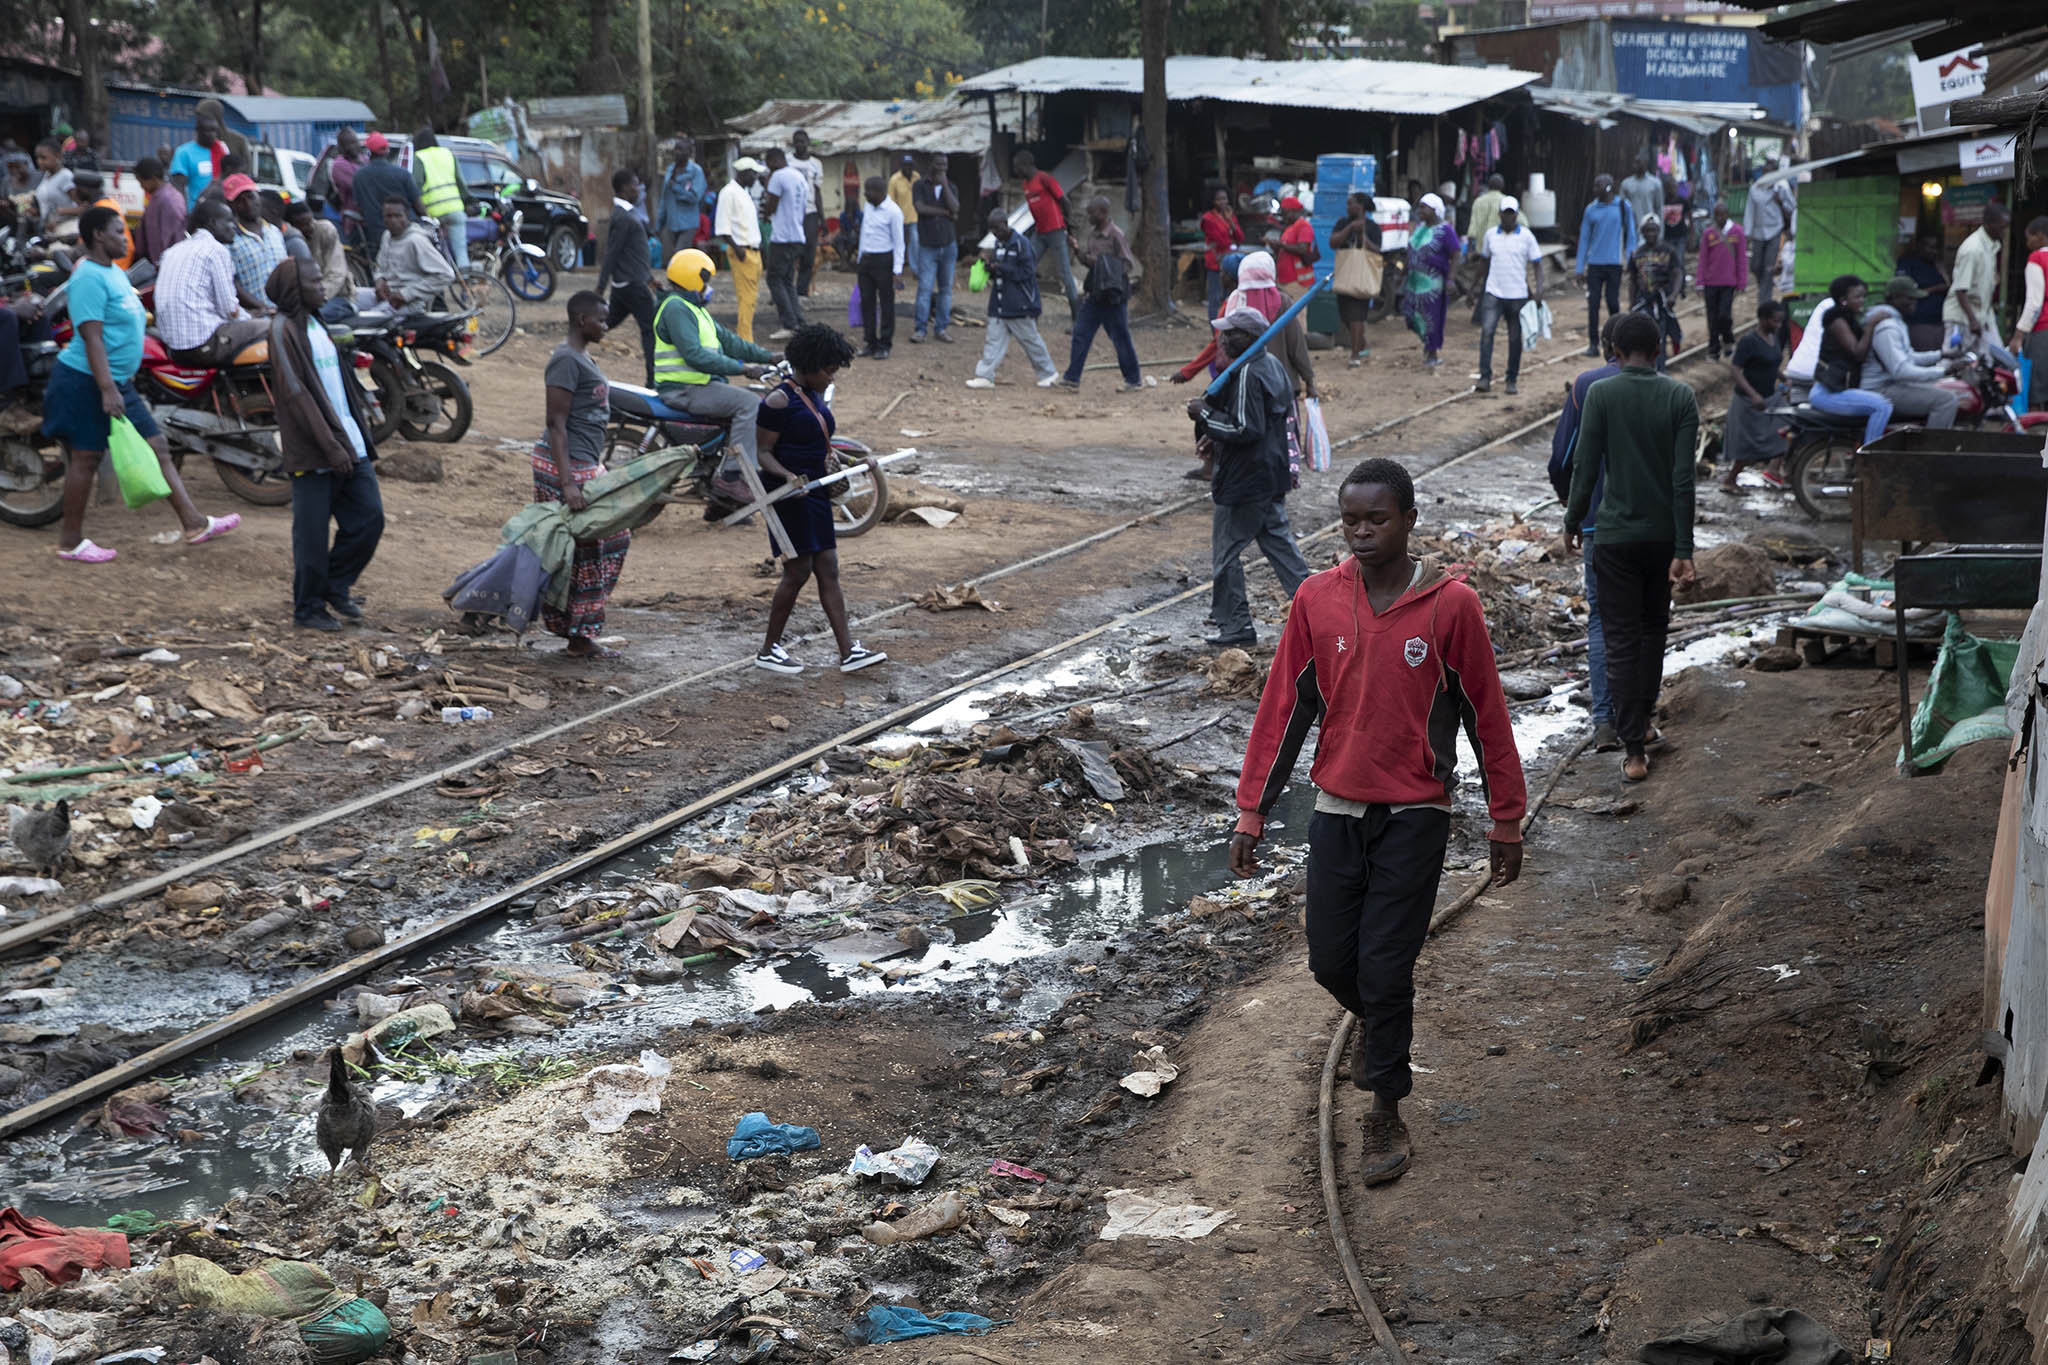 Kenyans walk in Kibera, Africa’s largest slum, in Nairobi. Kenya’s deep inequality between rich and poor, plus high unemployment in a heavily young population, are roots of this month’s Kenyan protests and violence. (Tyler Hicks/The New York Times)